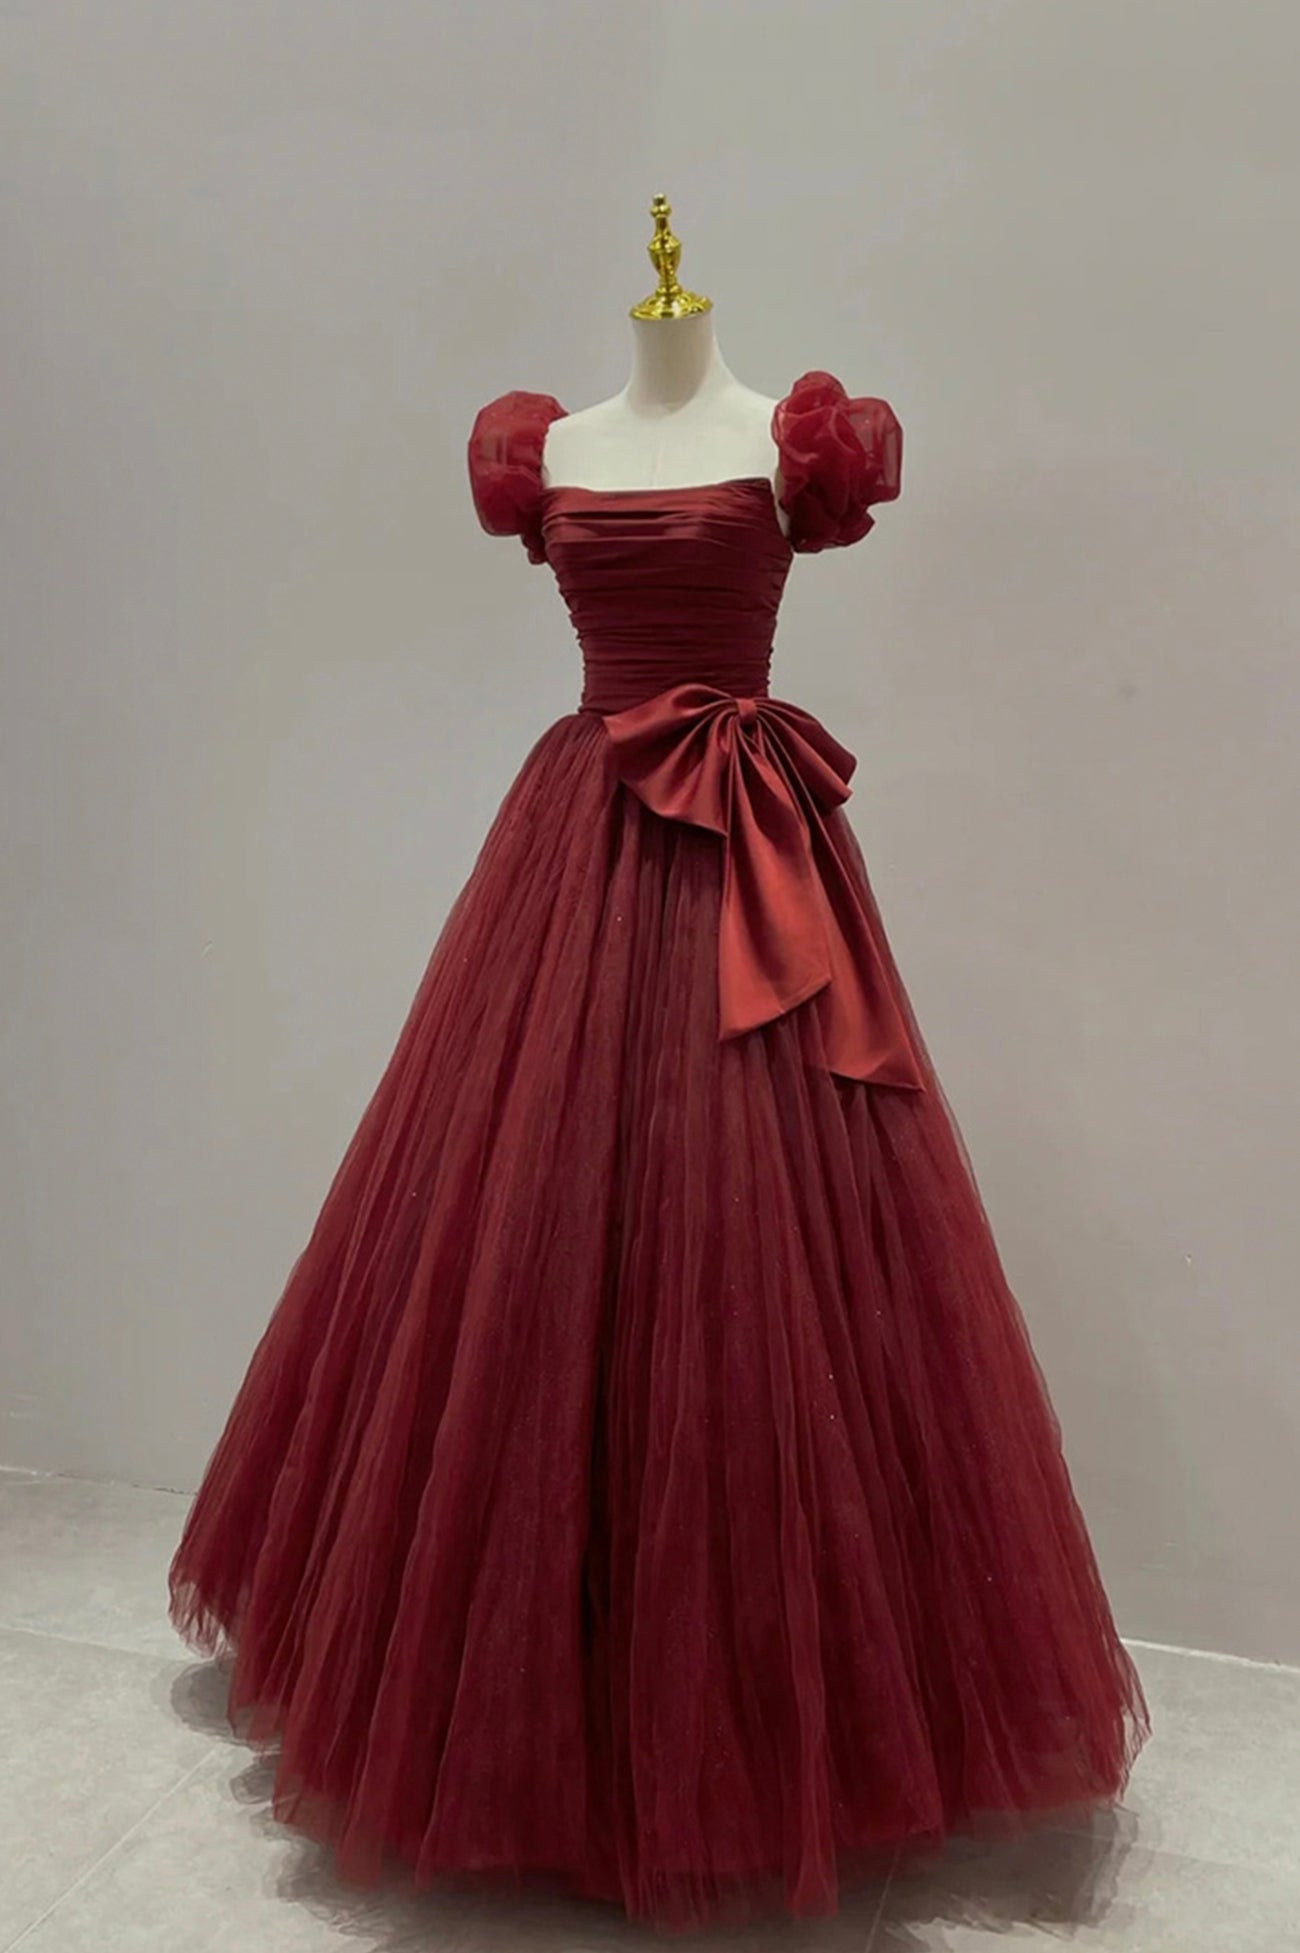 Burgundy Tulle Long Prom Dress, Beautiful A-Line Evening Party Dress